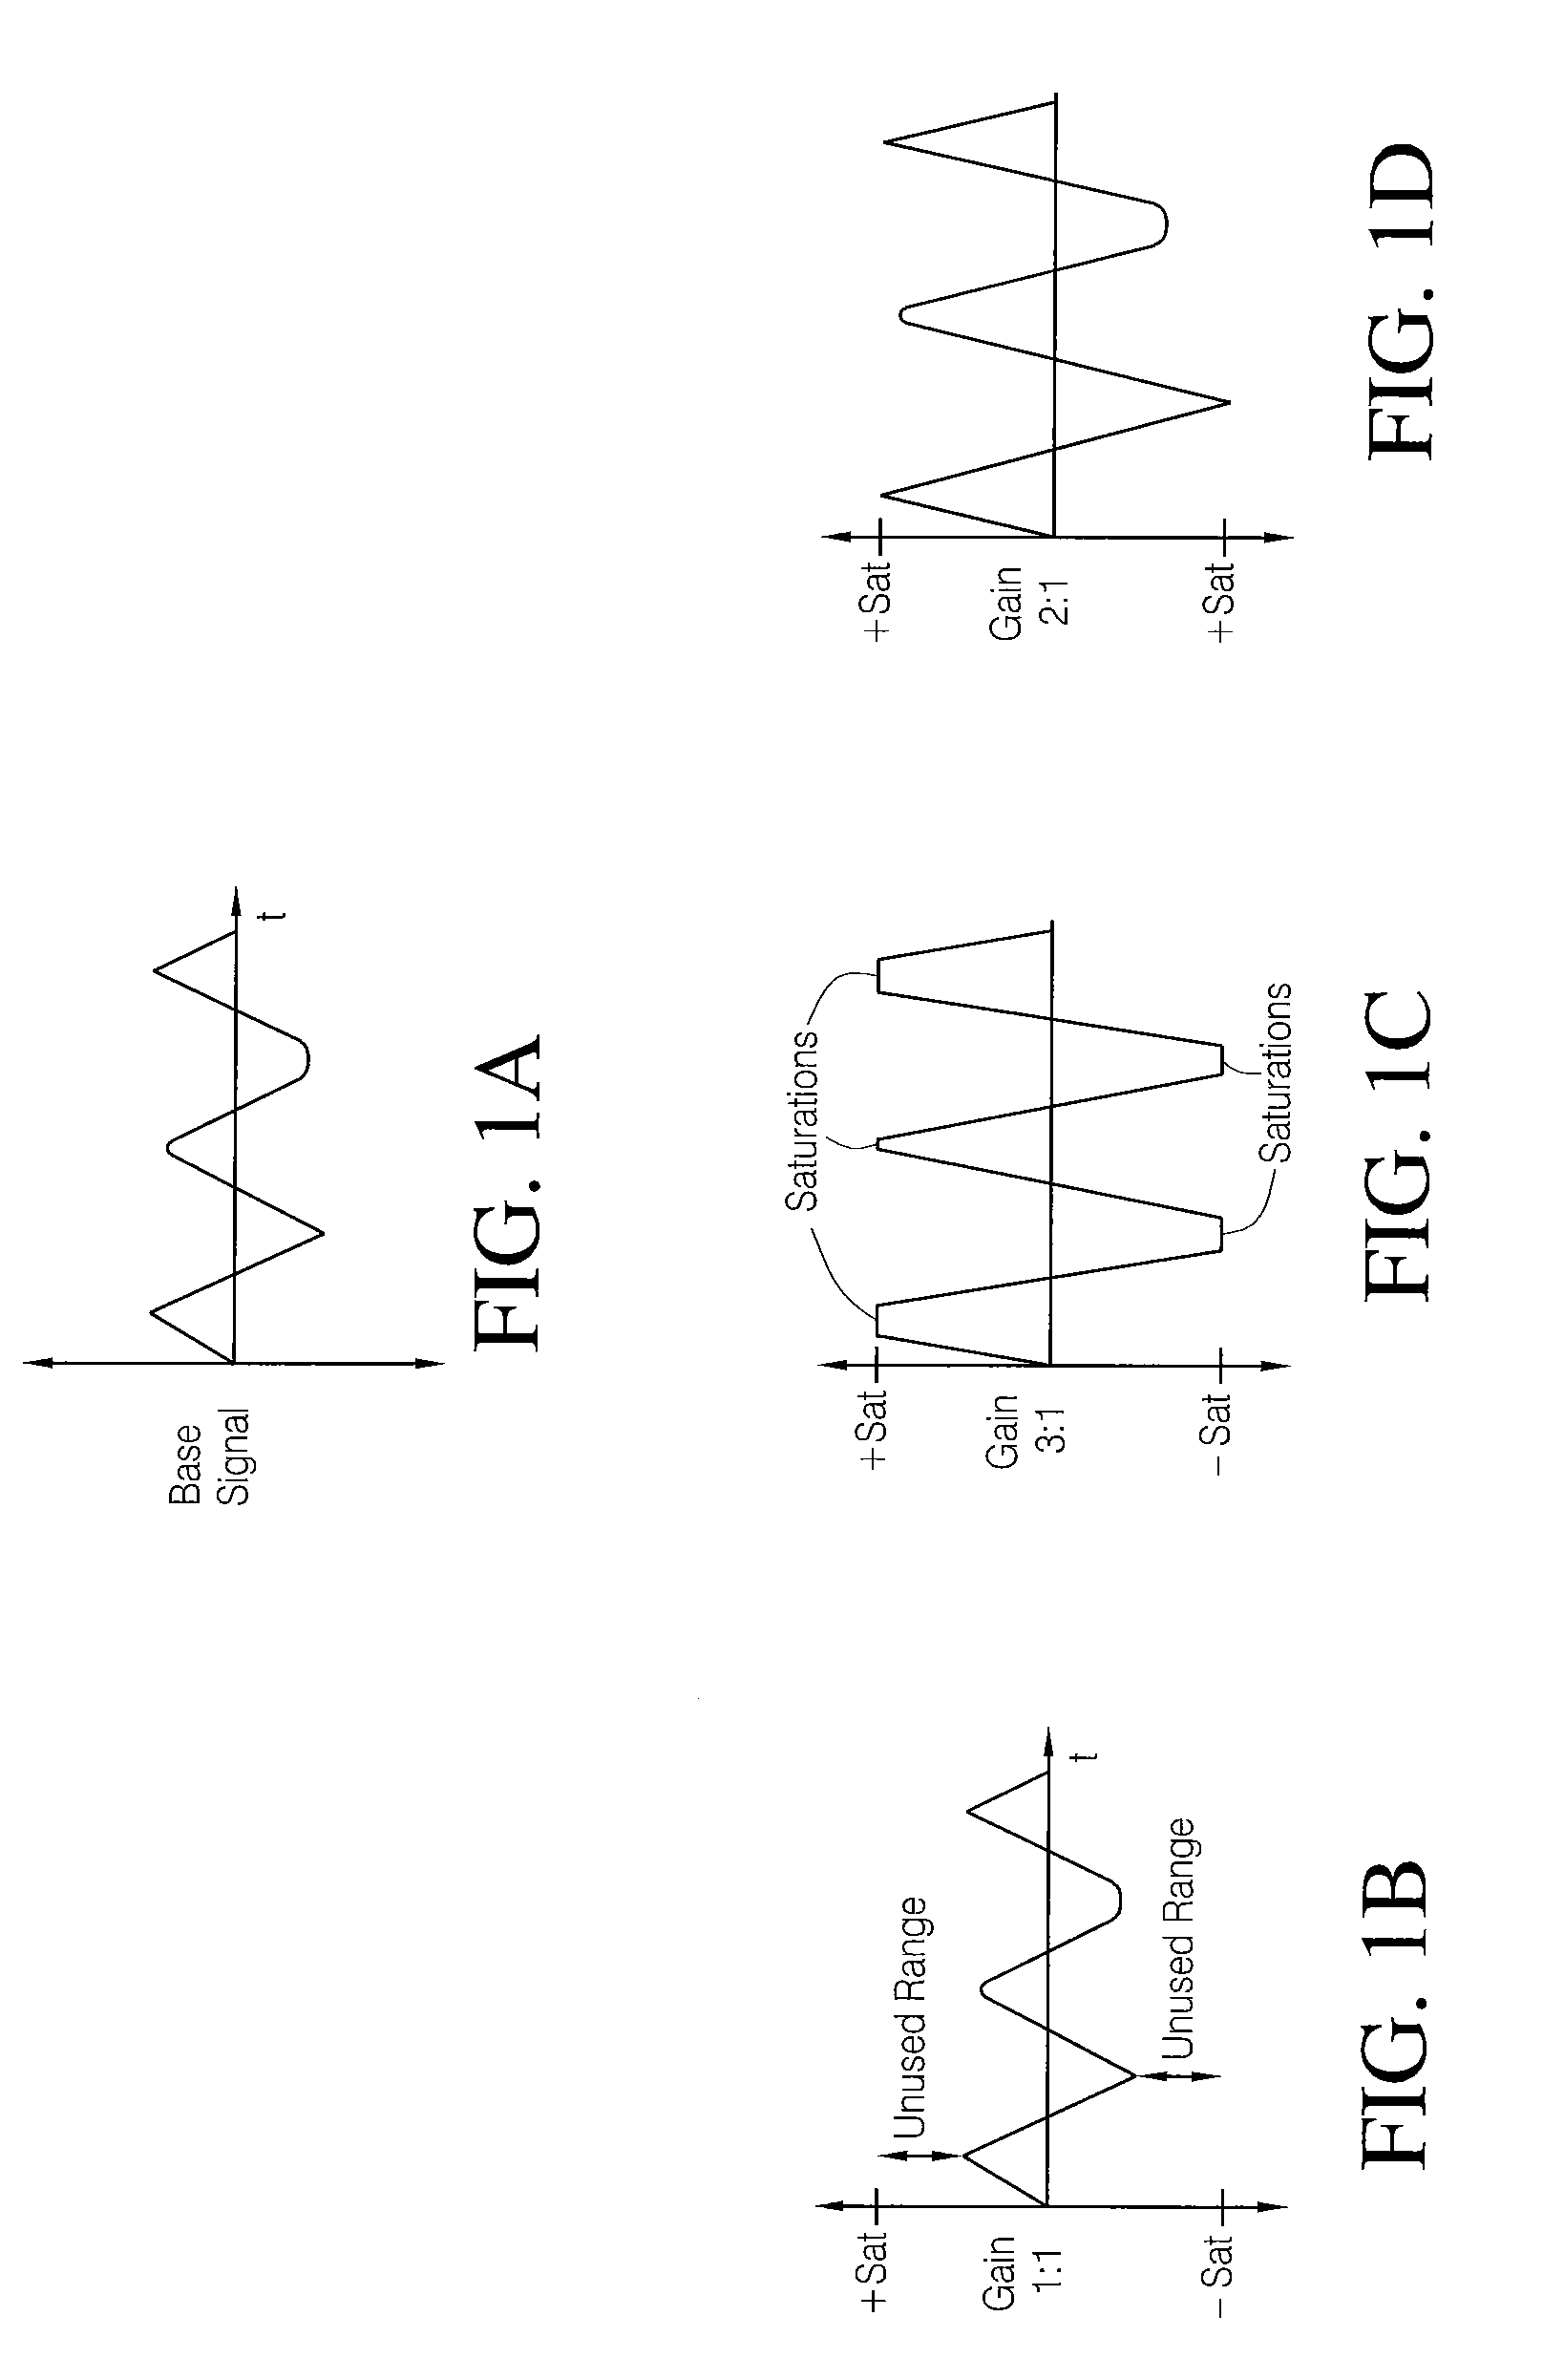 System and method to accelerate individualized gain adjustment in implantable medical device systems